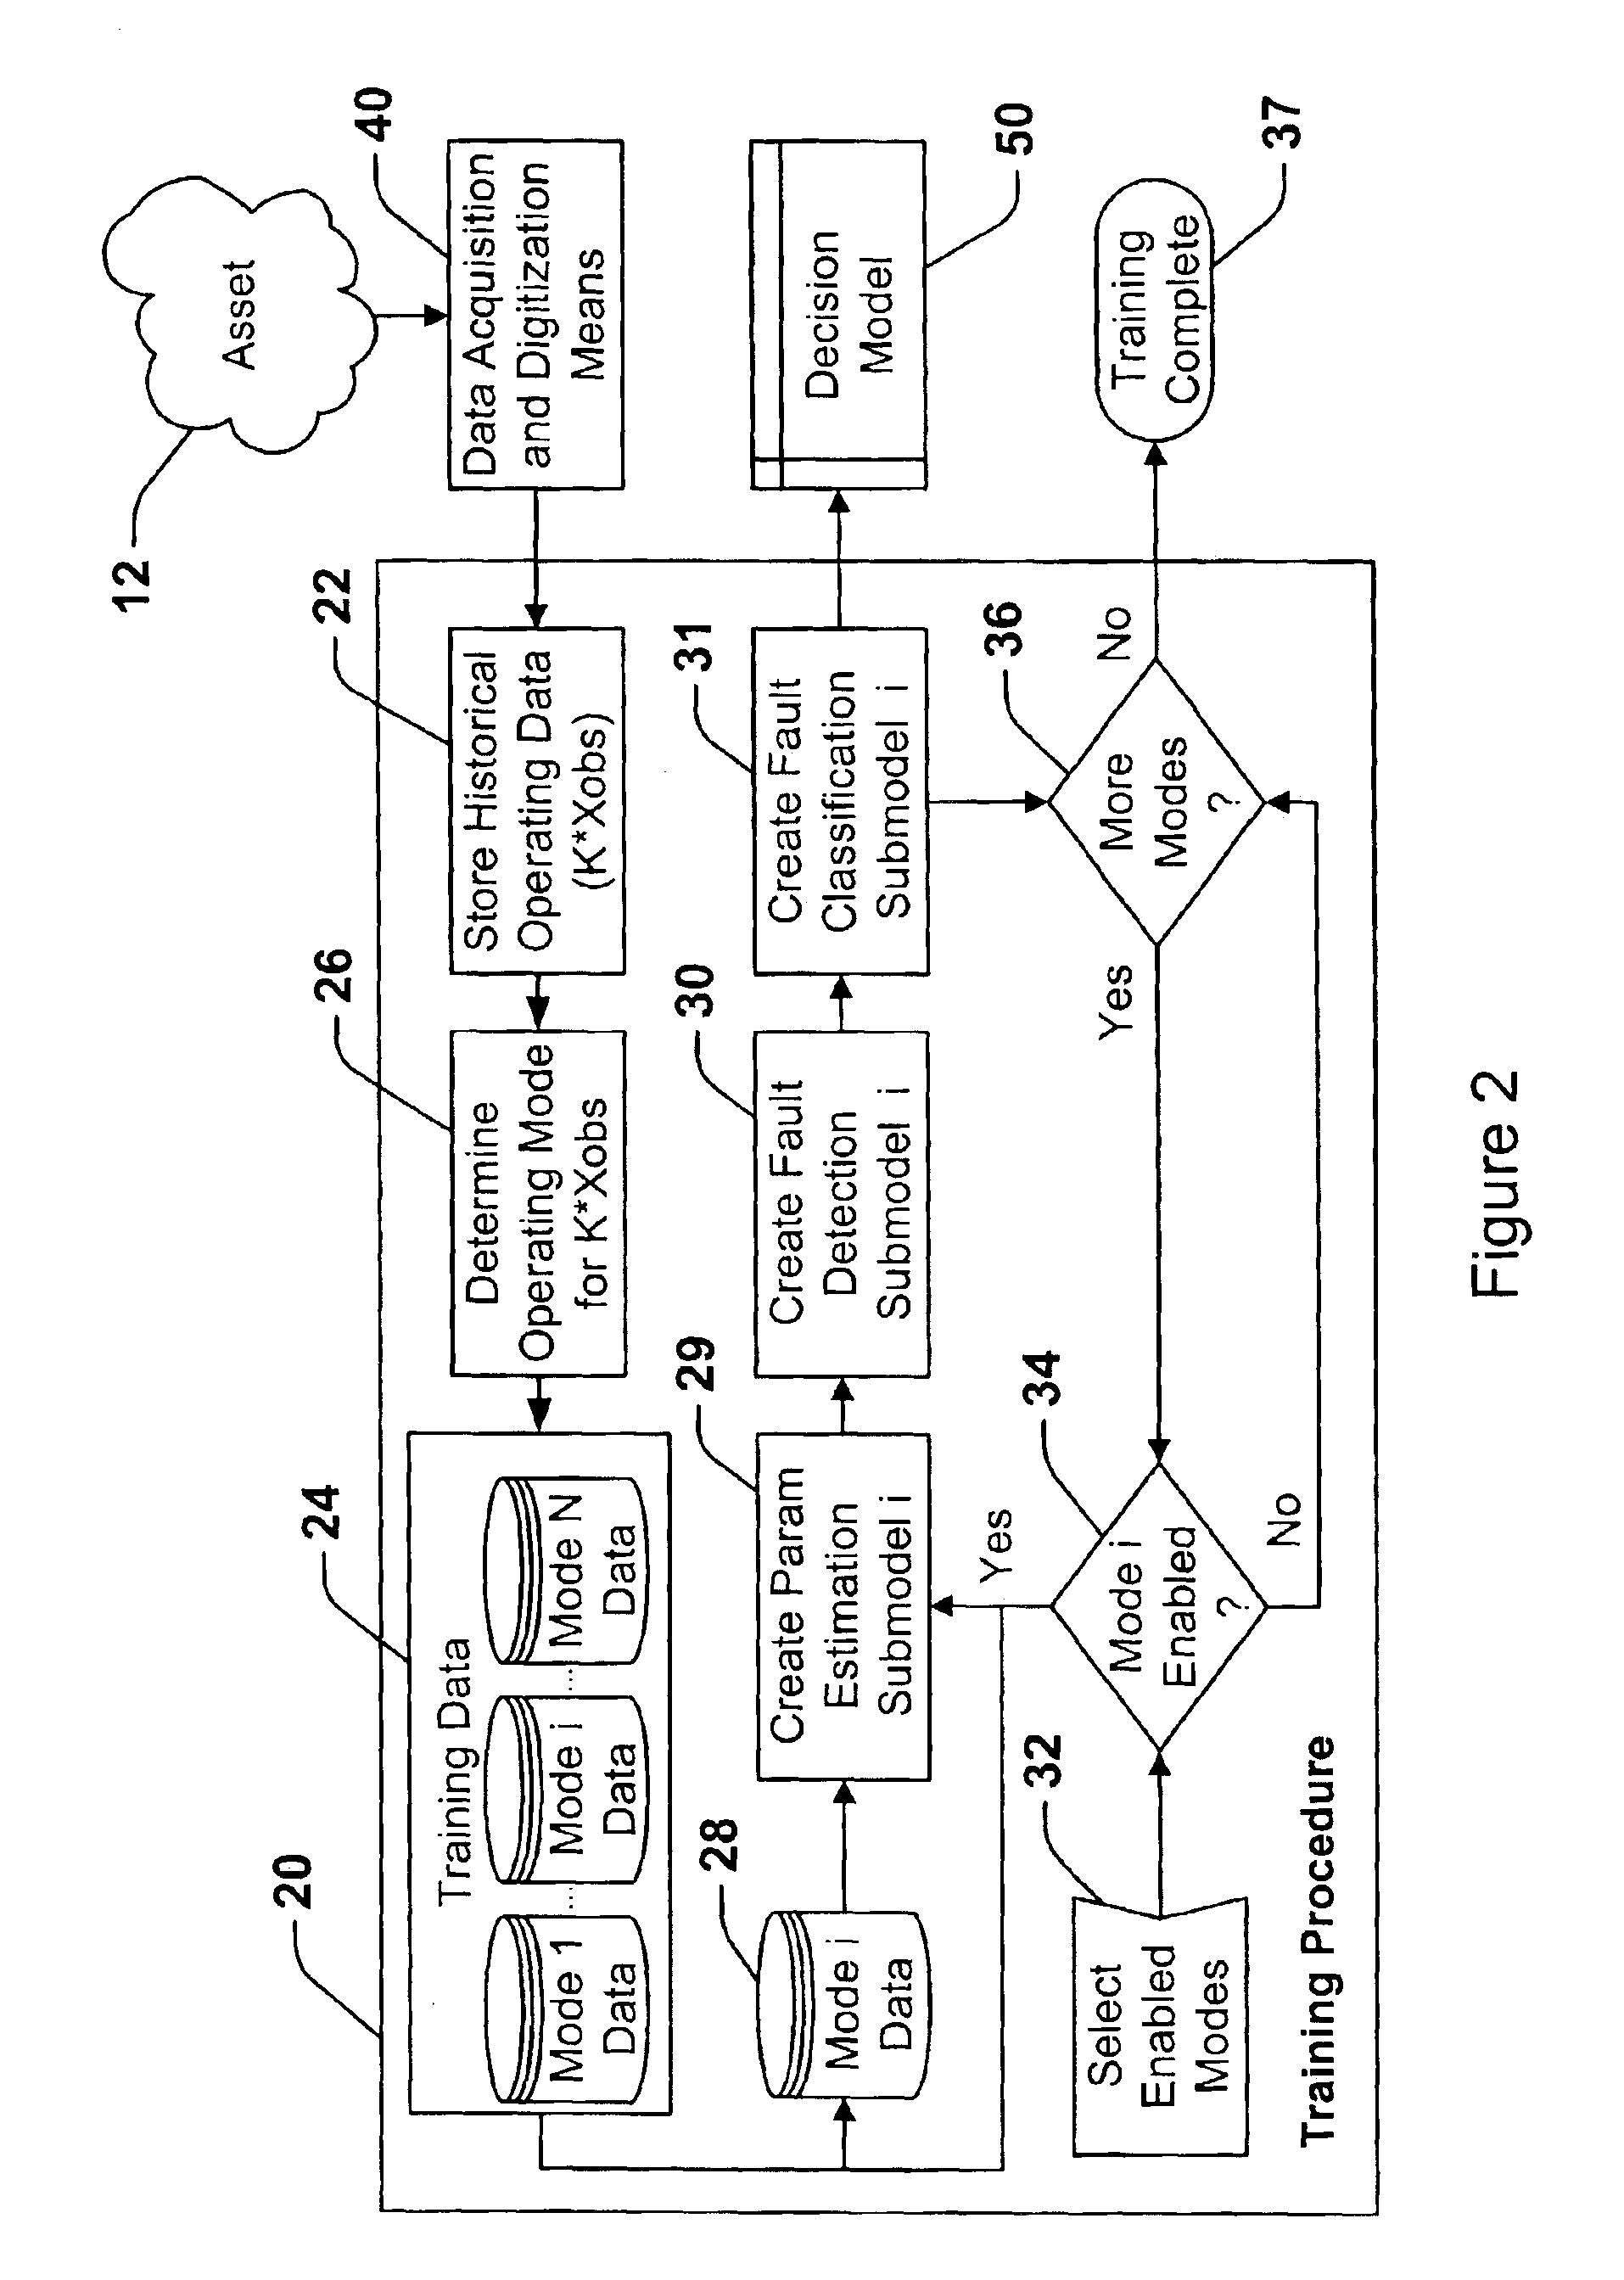 Surveillance system and method having an operating mode partitioned fault classification model